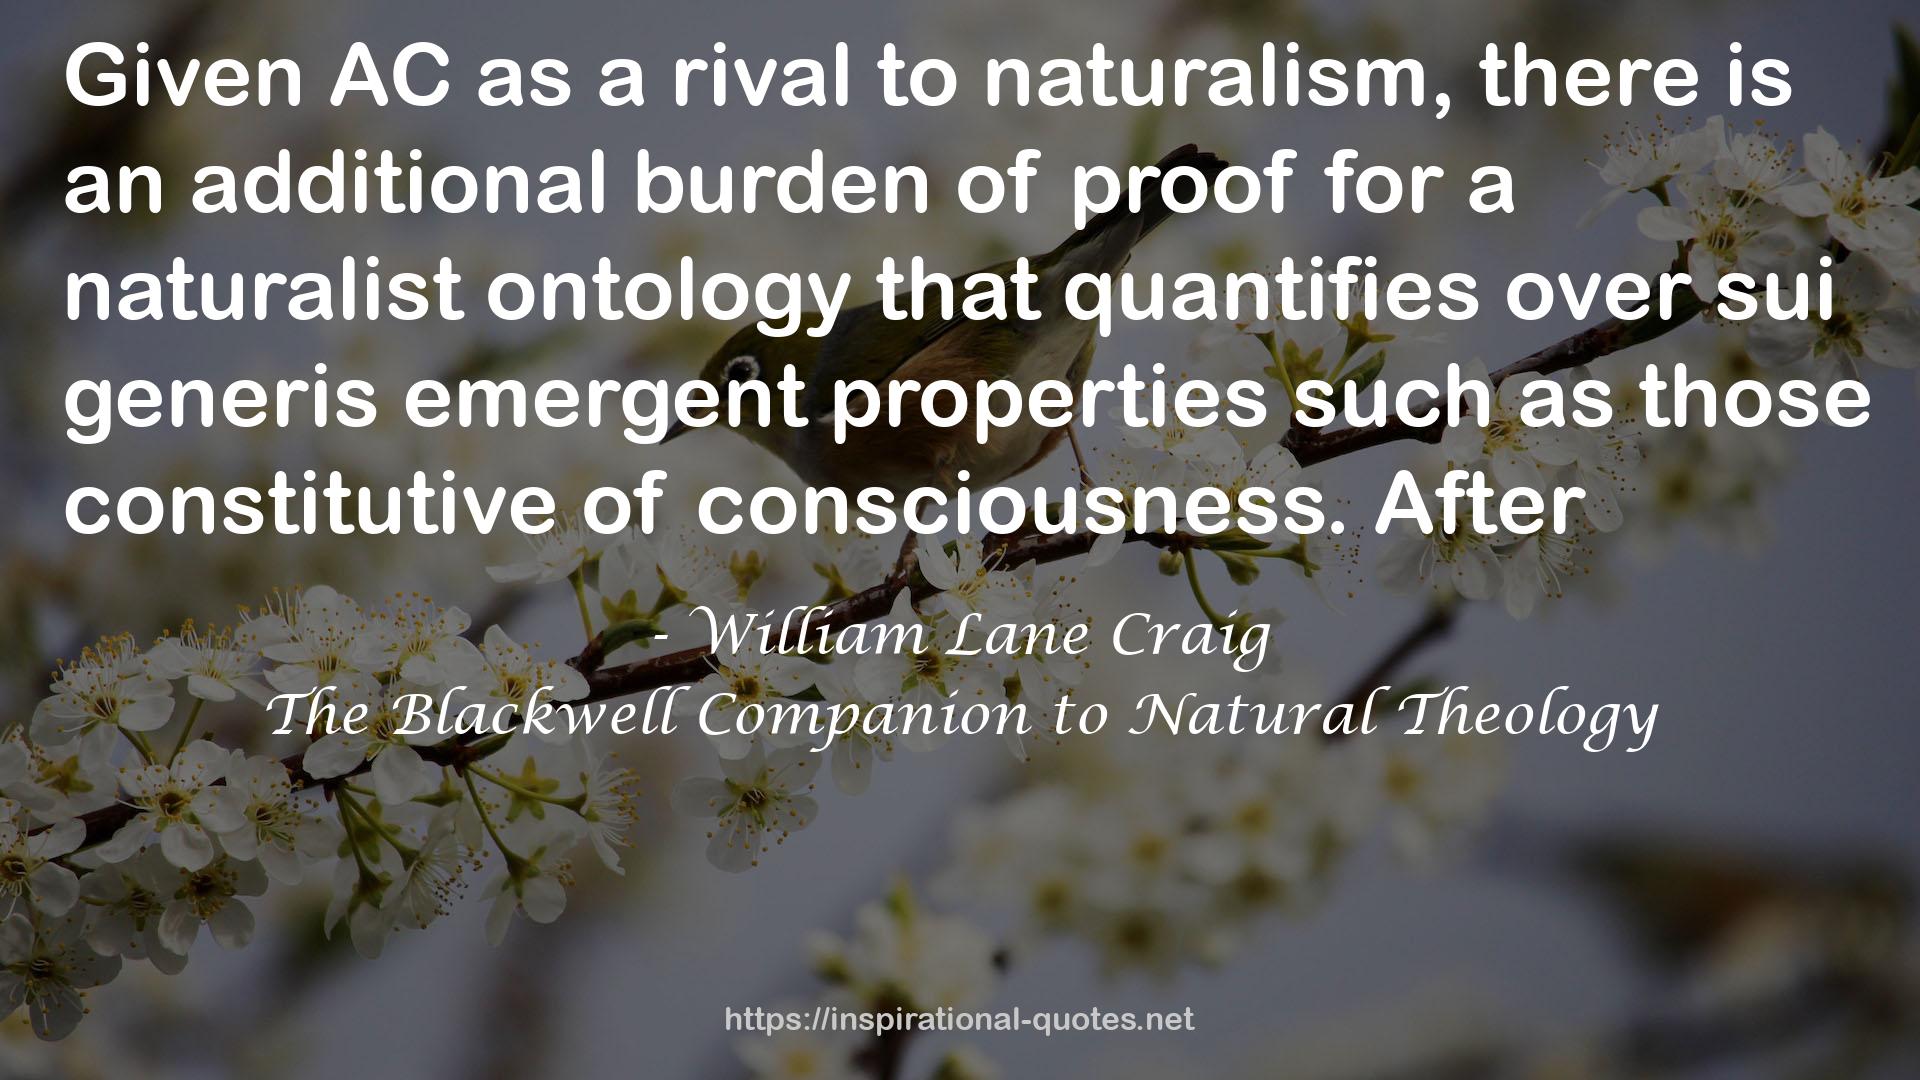 The Blackwell Companion to Natural Theology QUOTES